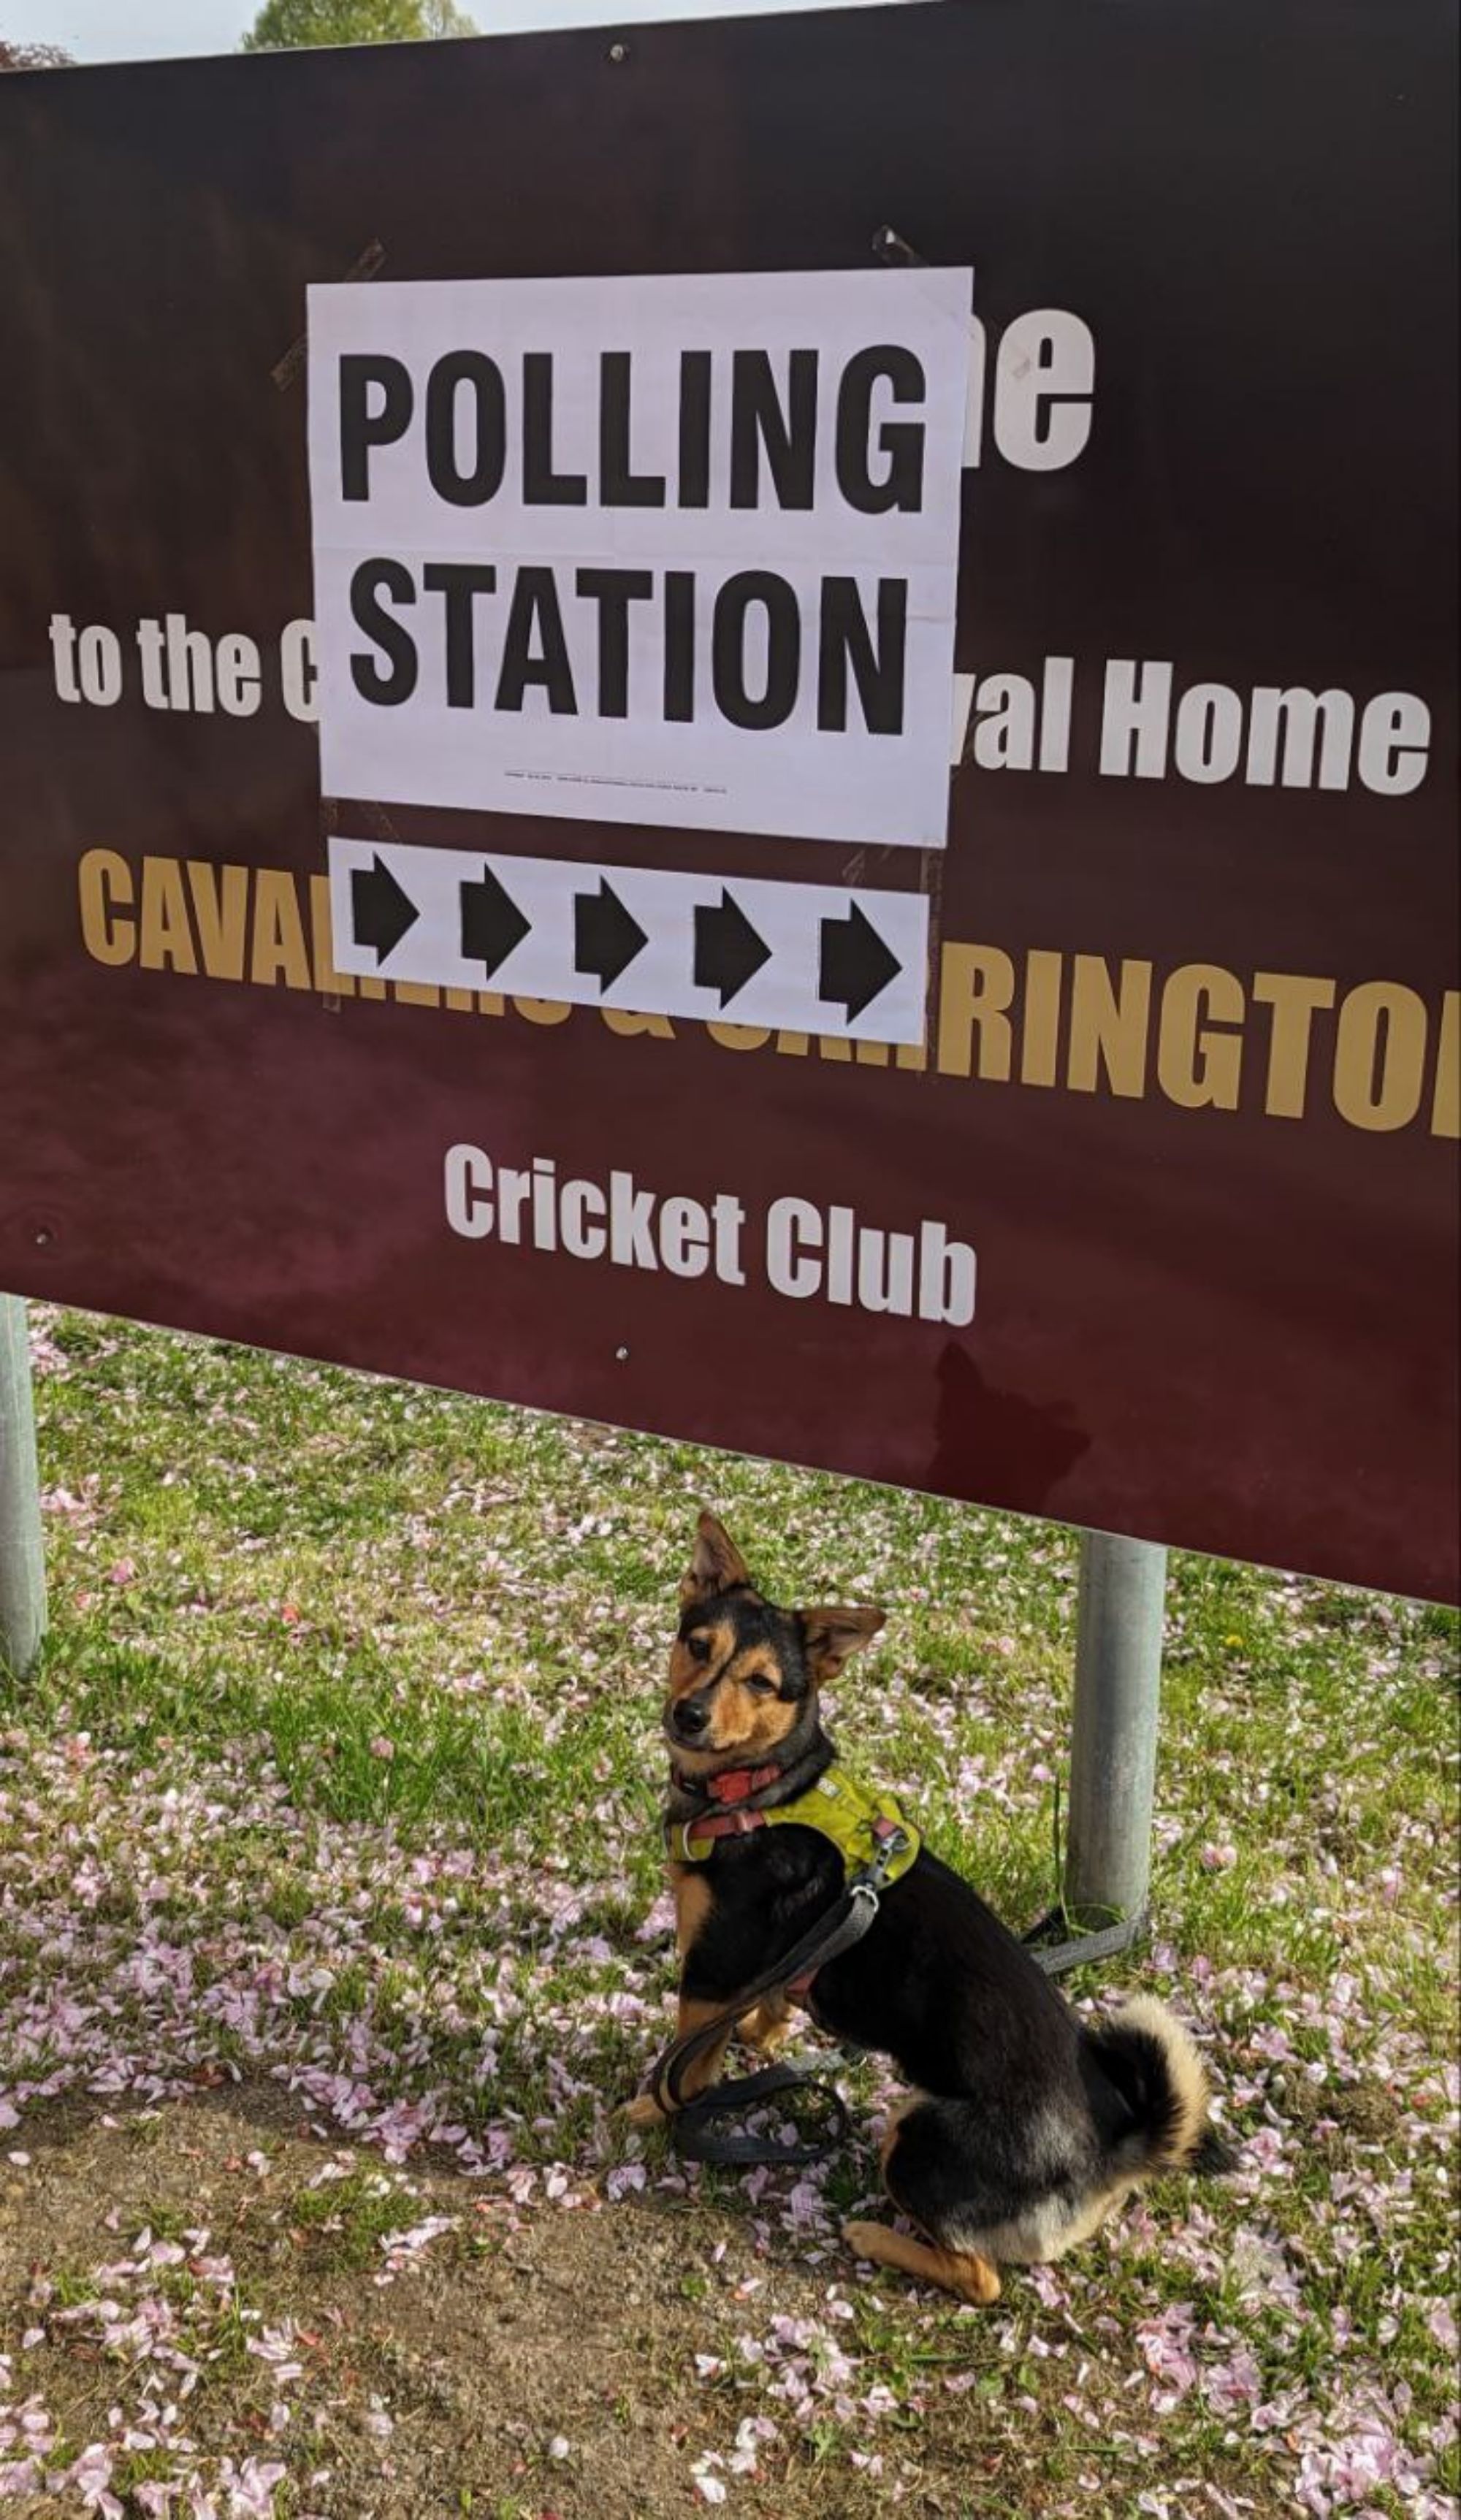 Cookie the dog sitting under a sign that reads "polling station 👉👉", looking slightly puzzled as to why she's been asked to have a photo here, but seems happy enough to be supporting democracy